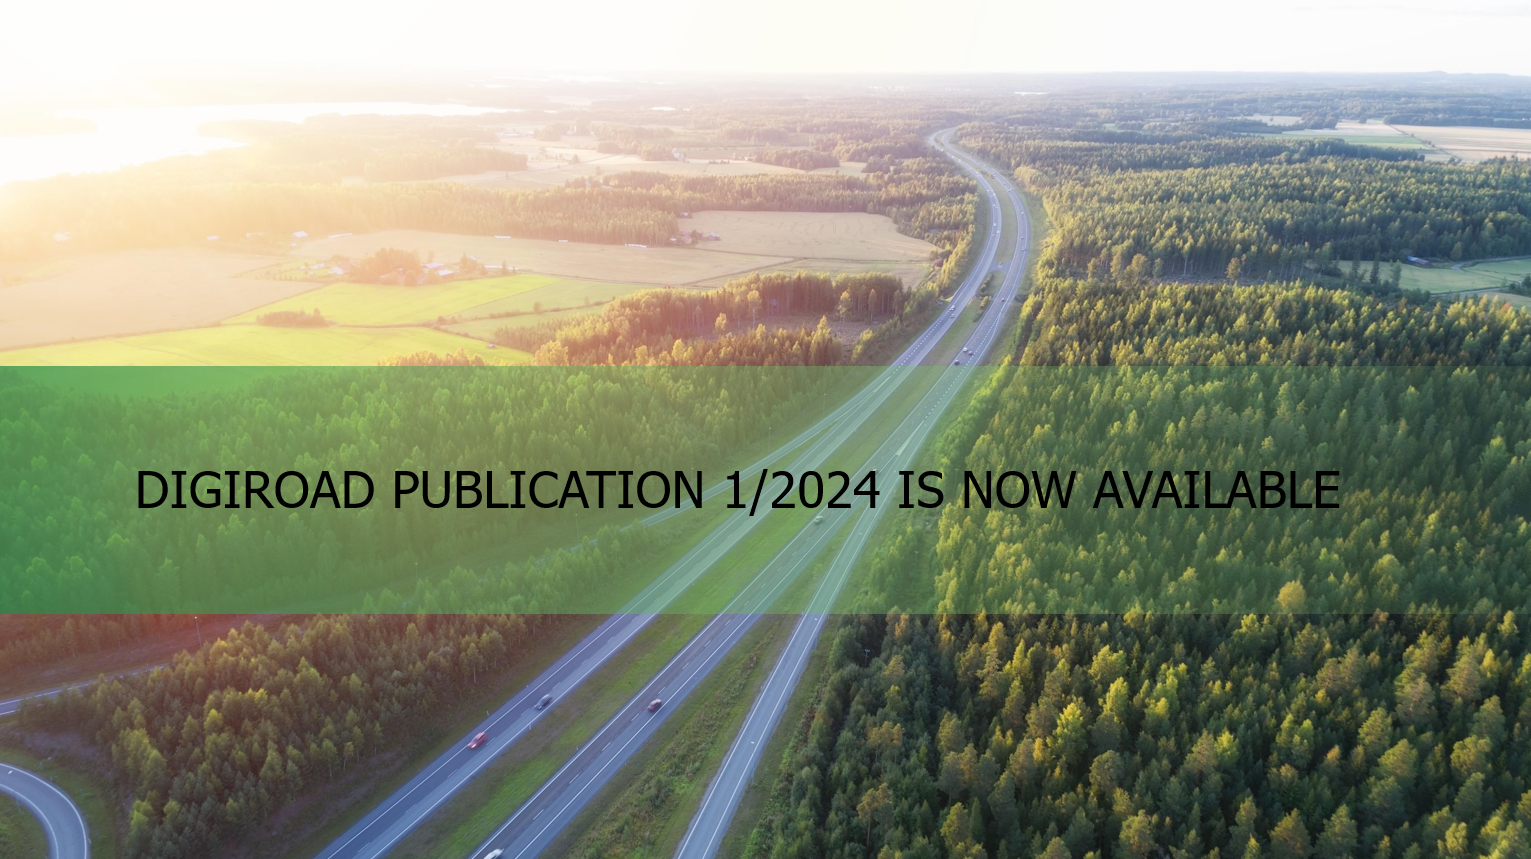 Digiroad publication 3/2022 is now available